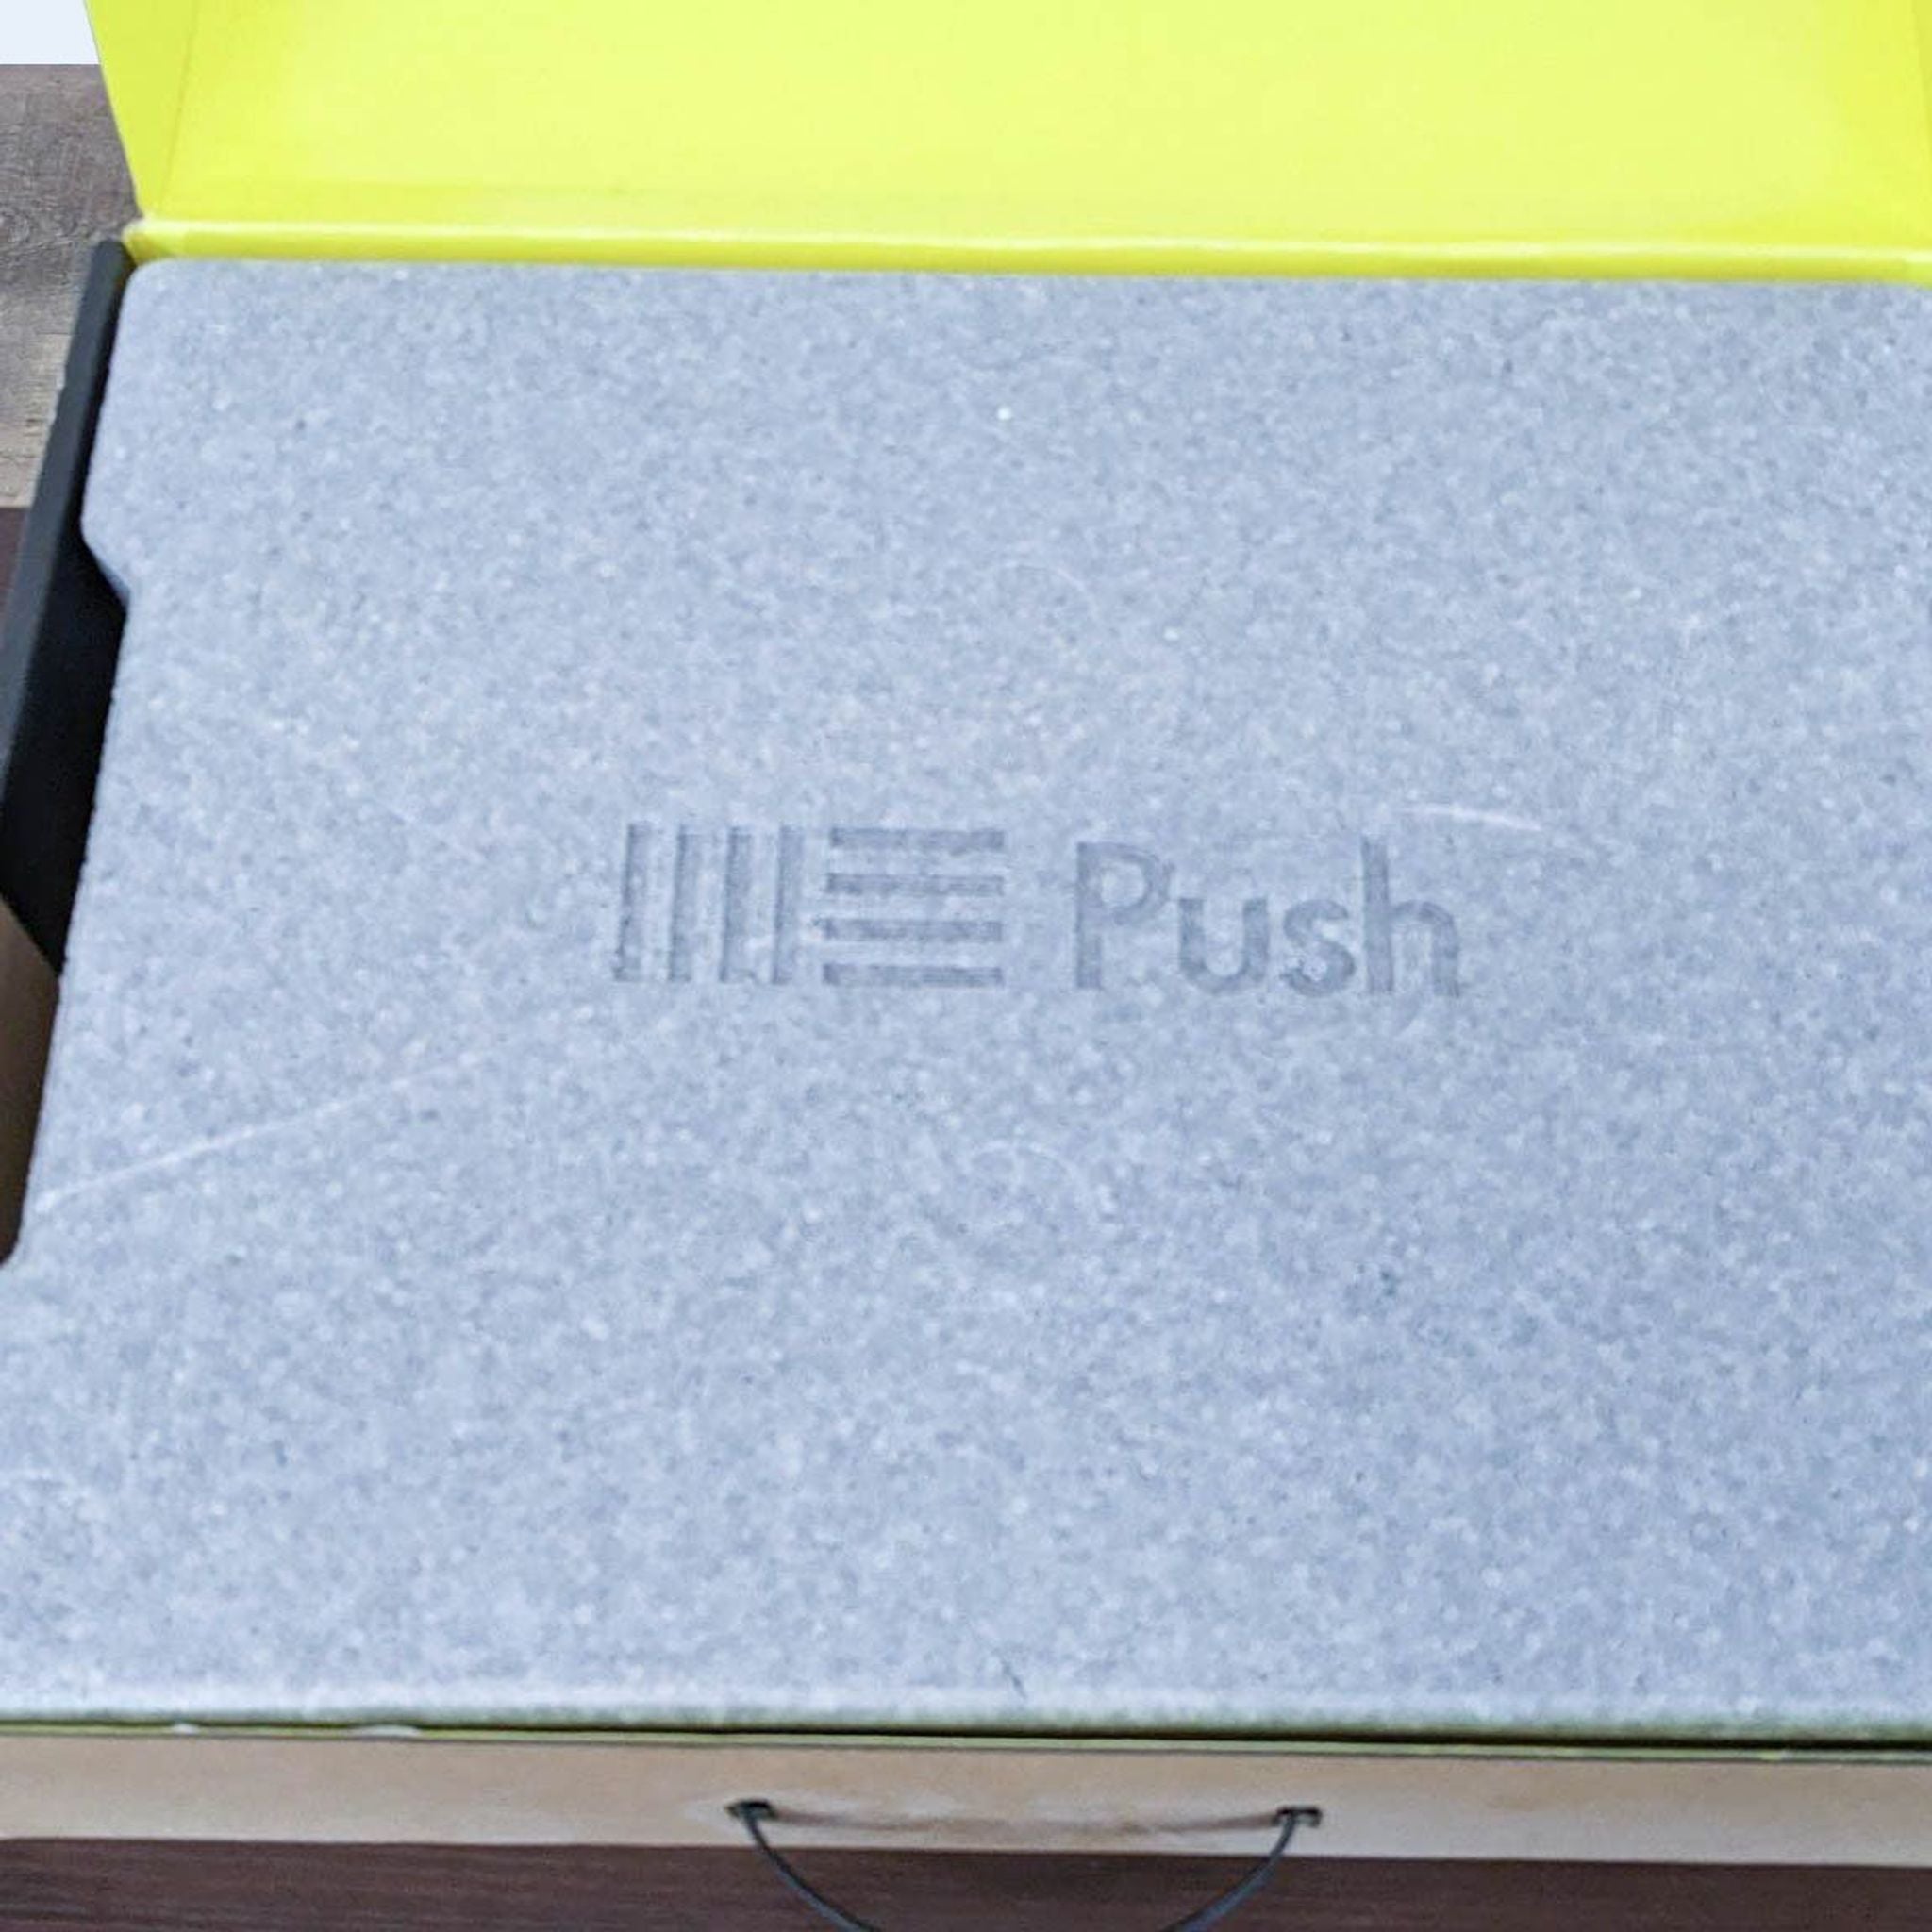 Ableton Push MIDI controller's original grey foam packaging with logo, viewed partially open.